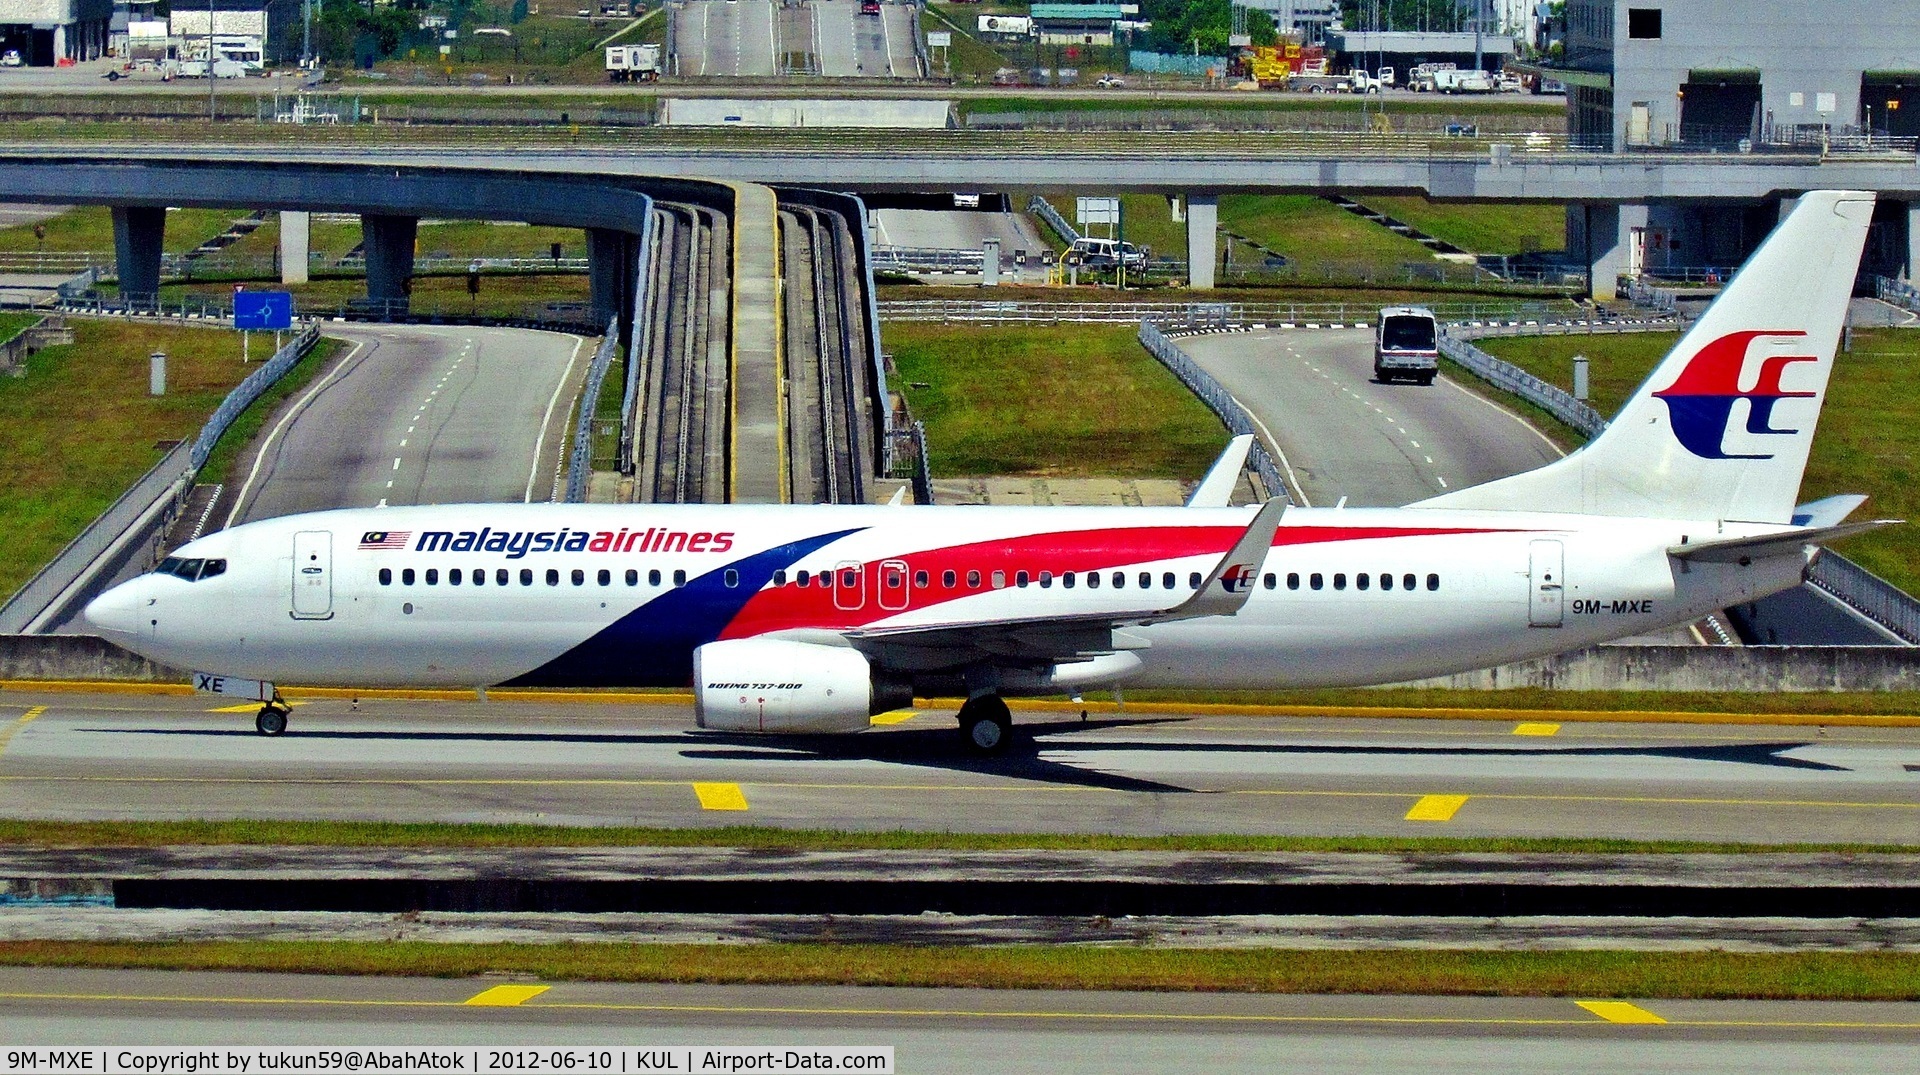 9M-MXE, 2011 Boeing 737-8H6 C/N 40132, Malaysia Airlines